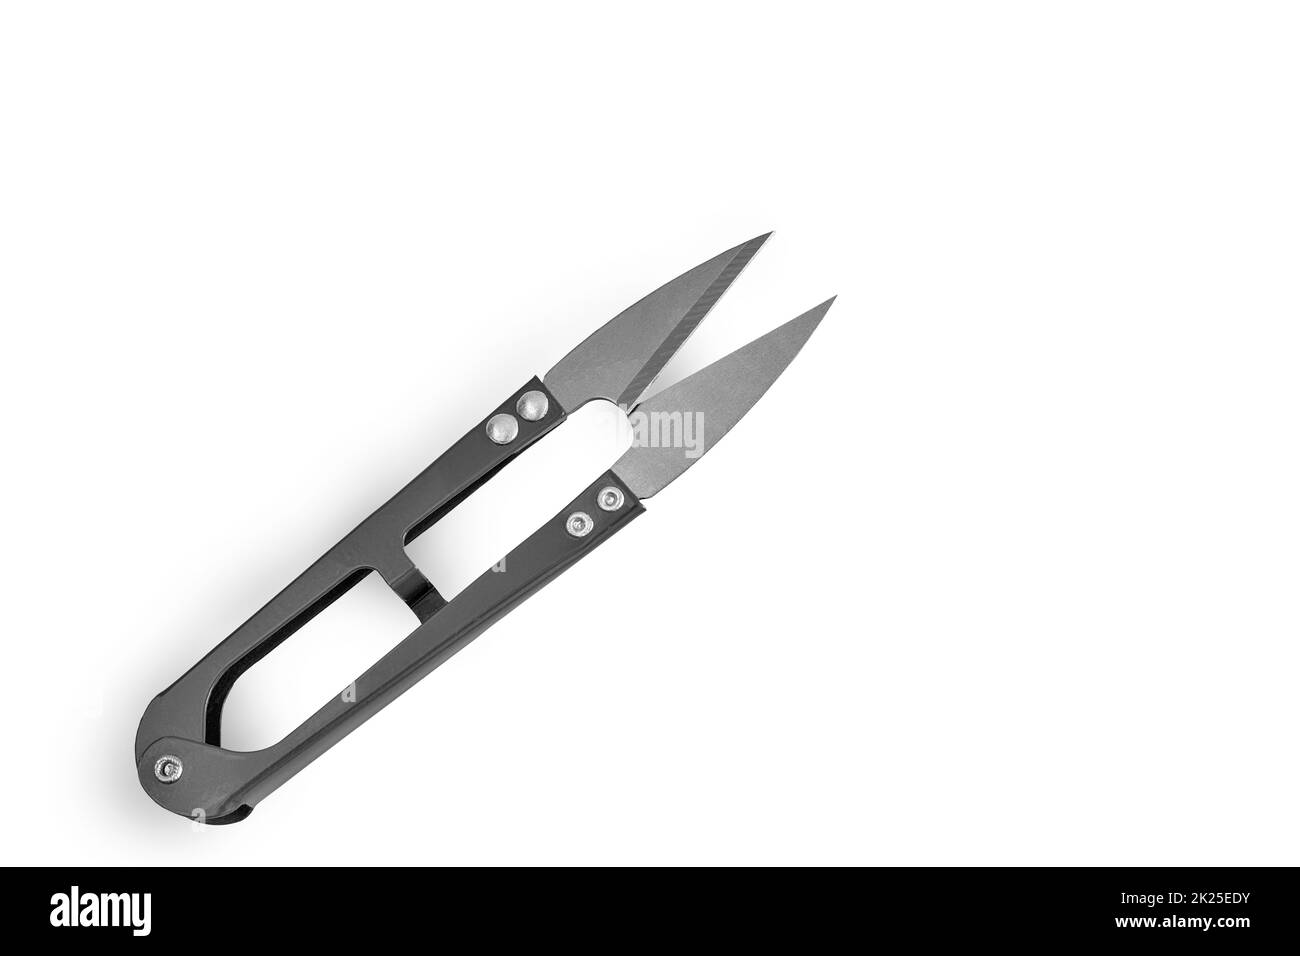 Comfortable sewing scissors isolated on a white background. Stock Photo